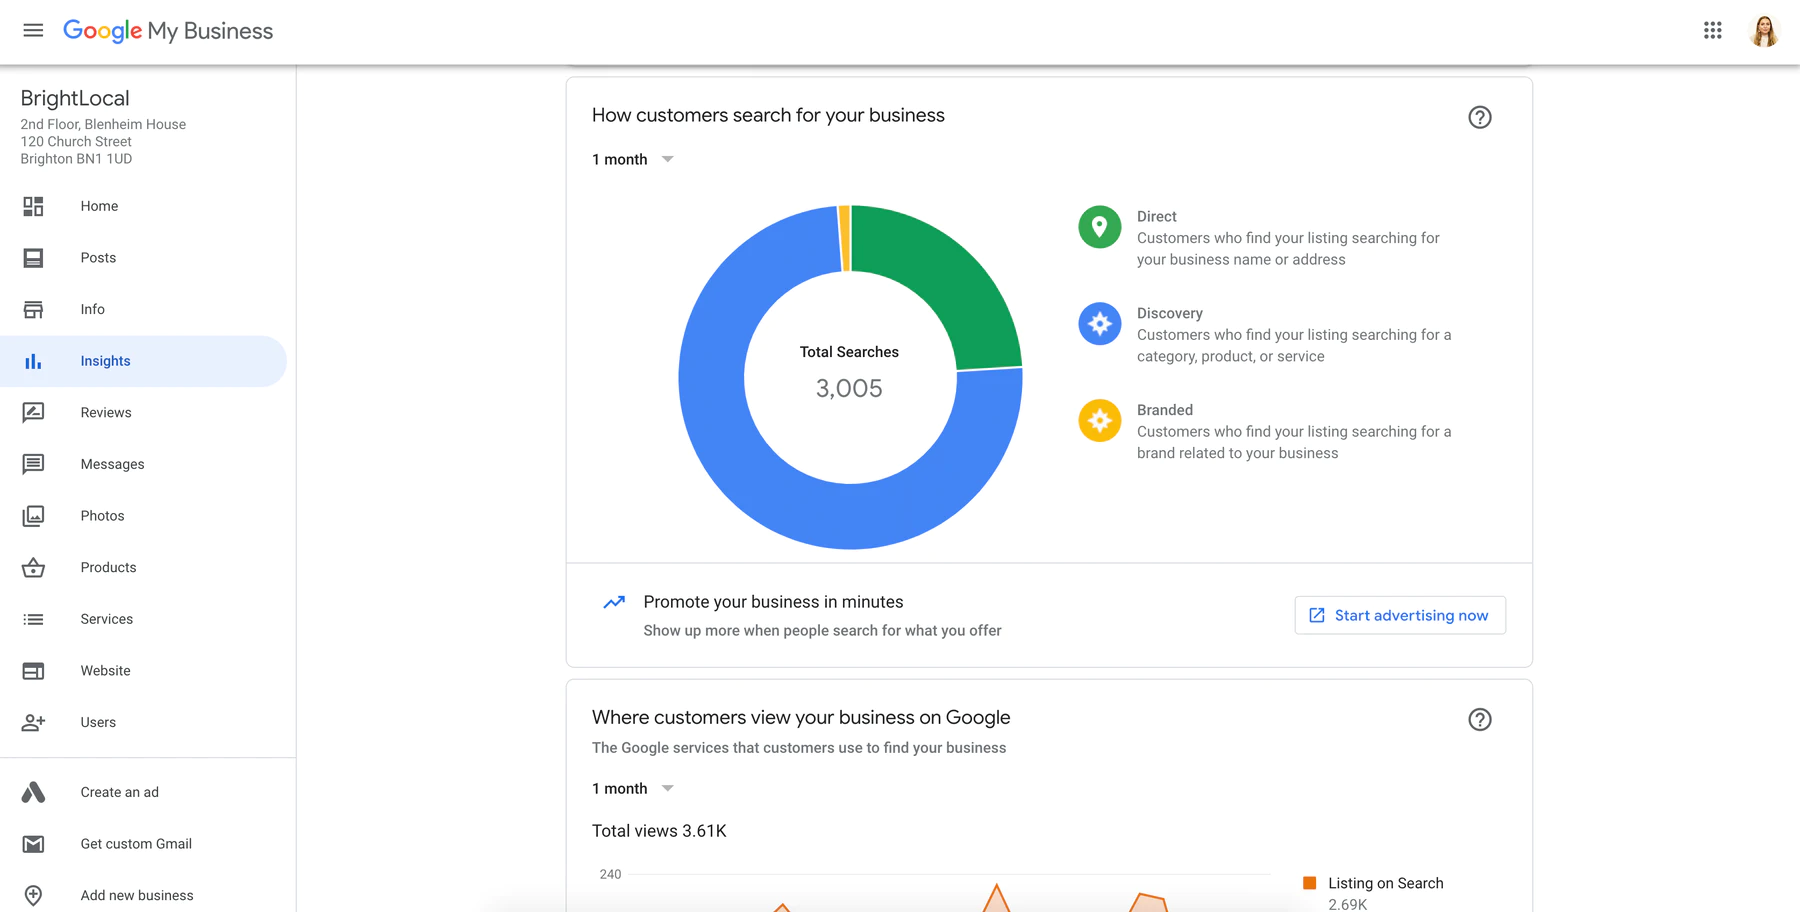 GBP Insights function in Google Business